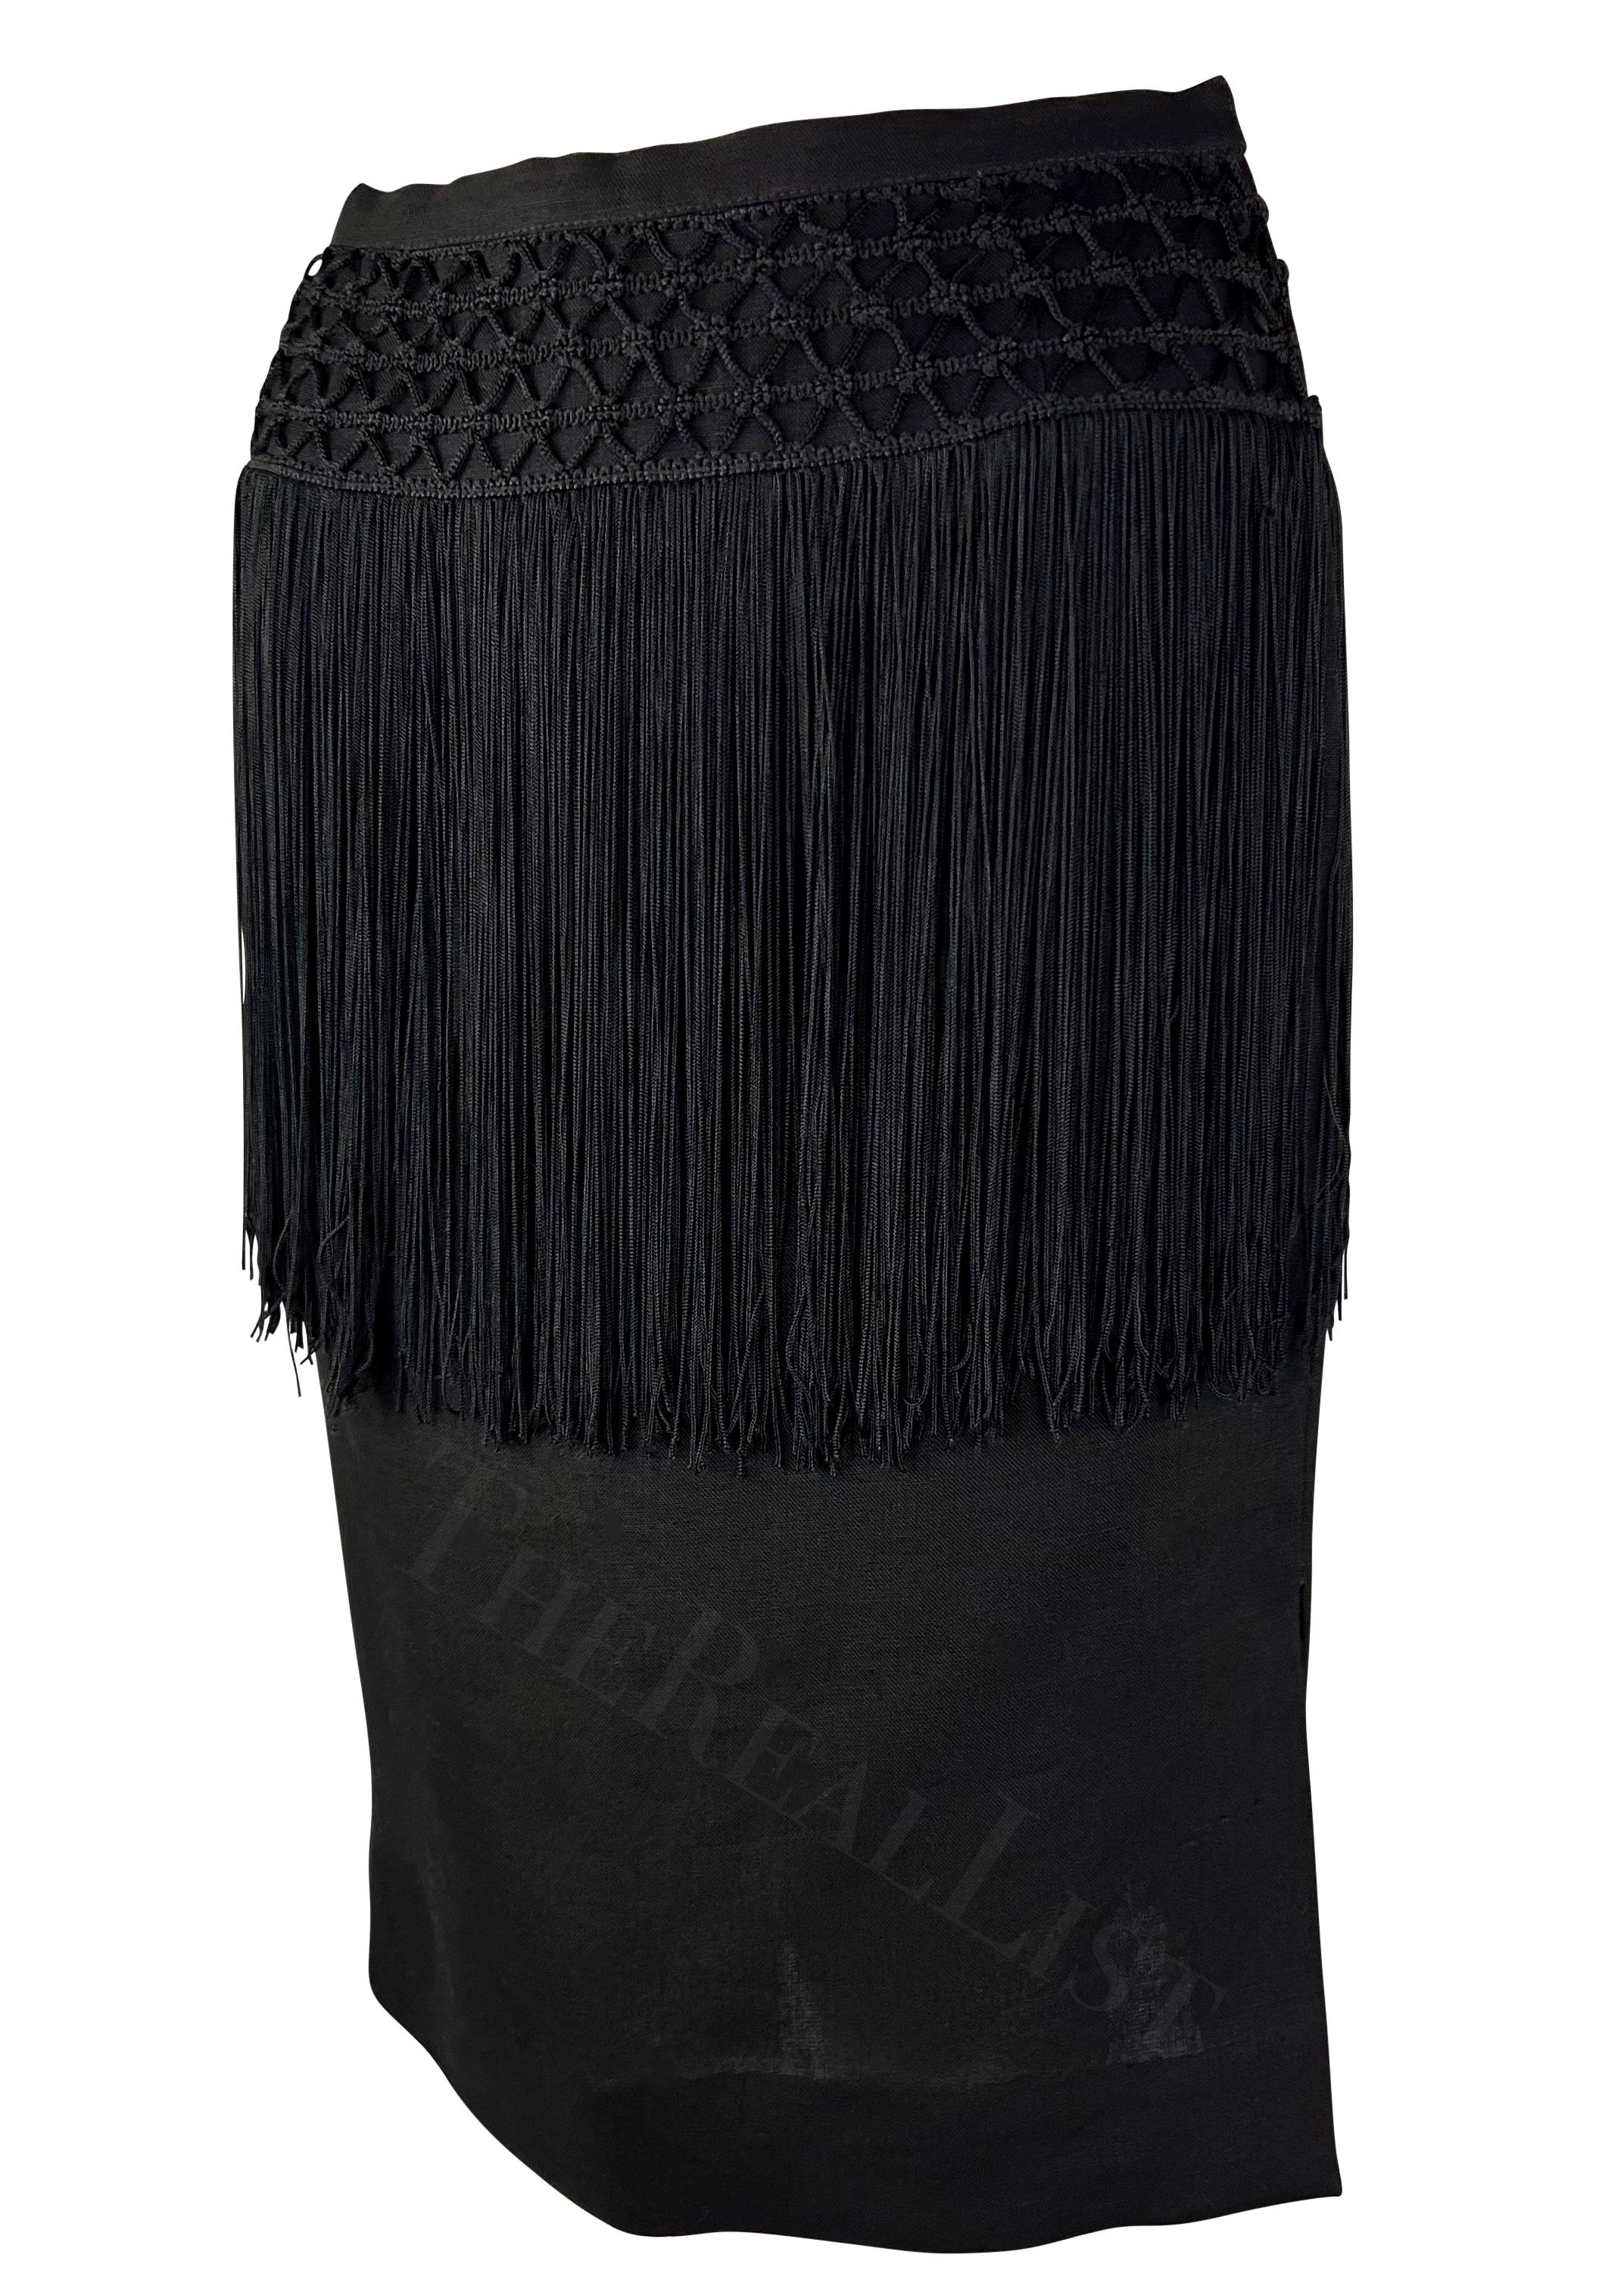 Presenting a black linen Valentino Garavani pencil skirt. From the early 1990s, this skirt is constructed of linen and features a slit on one side and crochet and fringe detail that cascades off the waist. Enhance your wardrobe with this exquisite